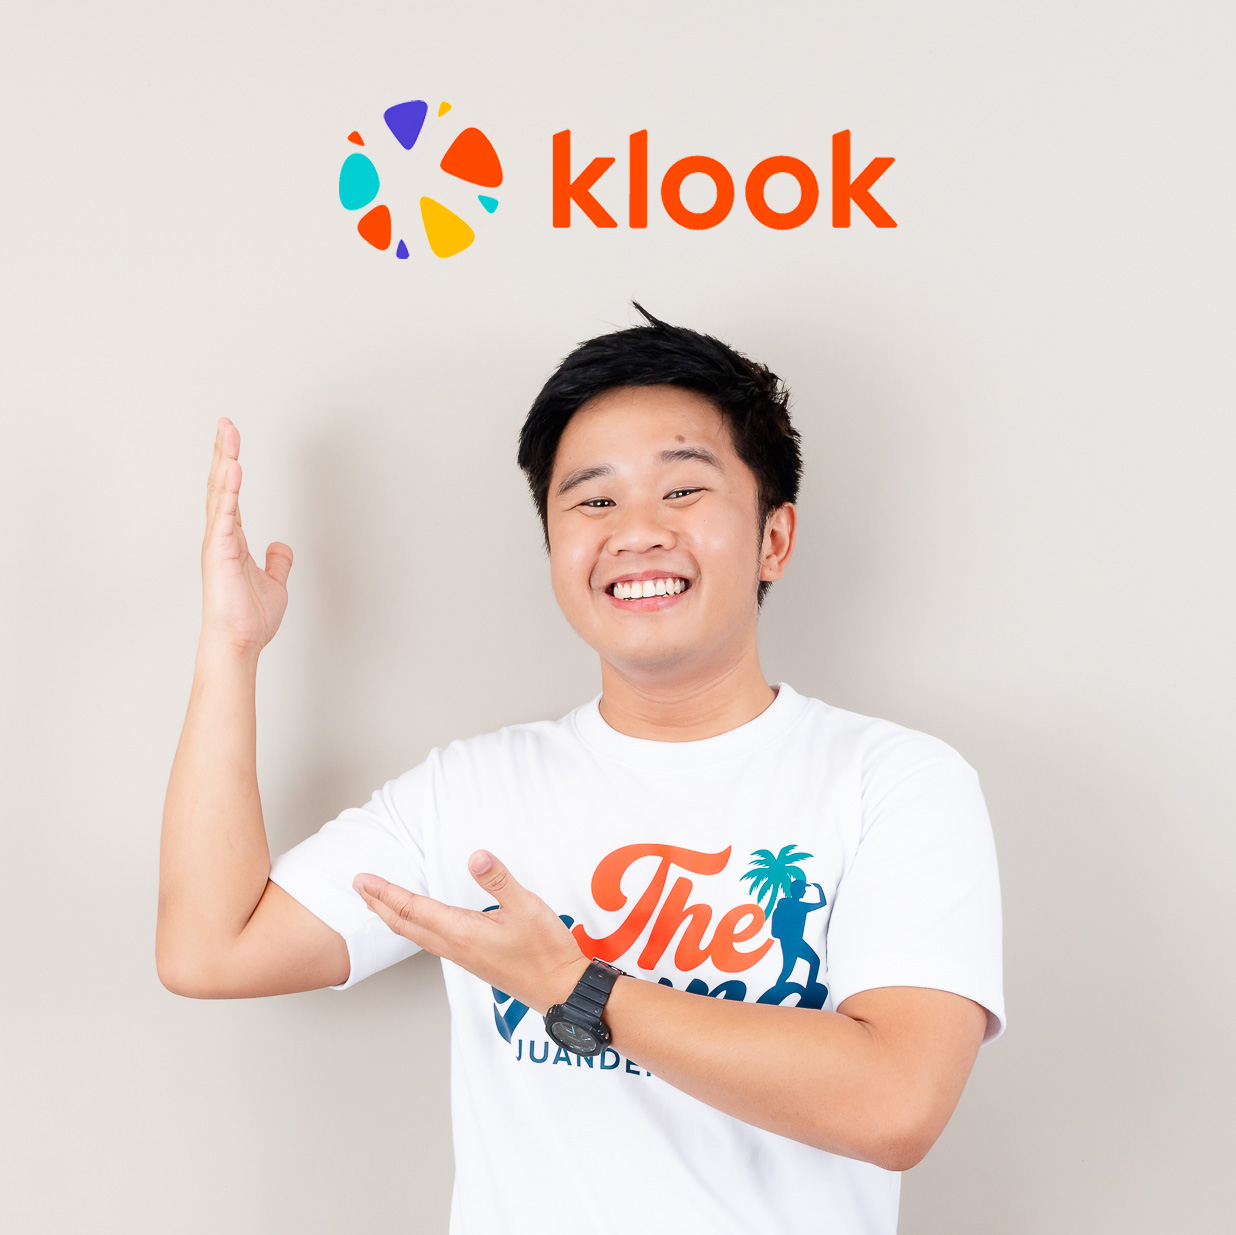 The young juanderer with klook logo